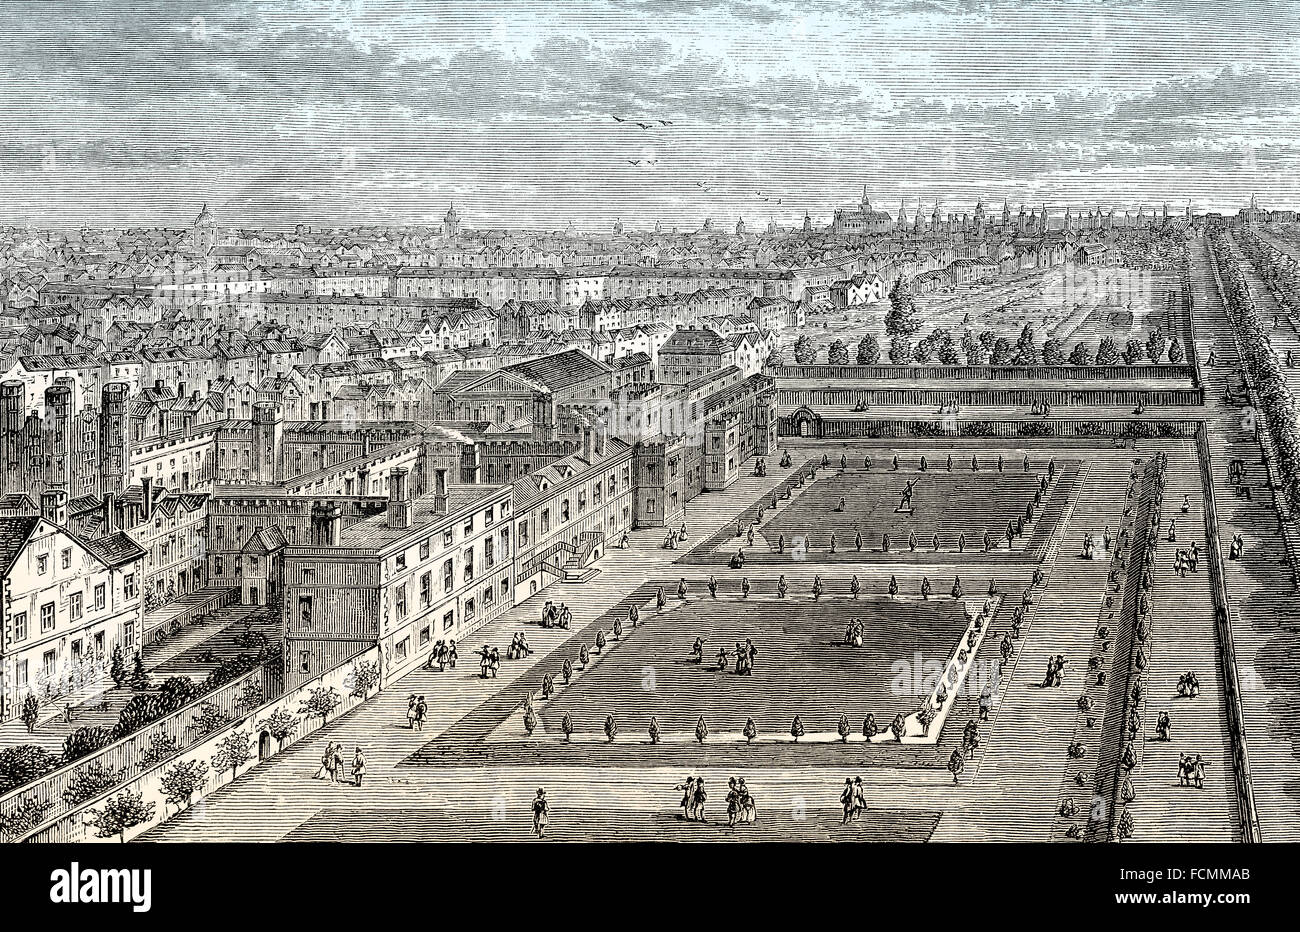 St James's Palace, left, and The Mall, 1715, London, England Stock Photo